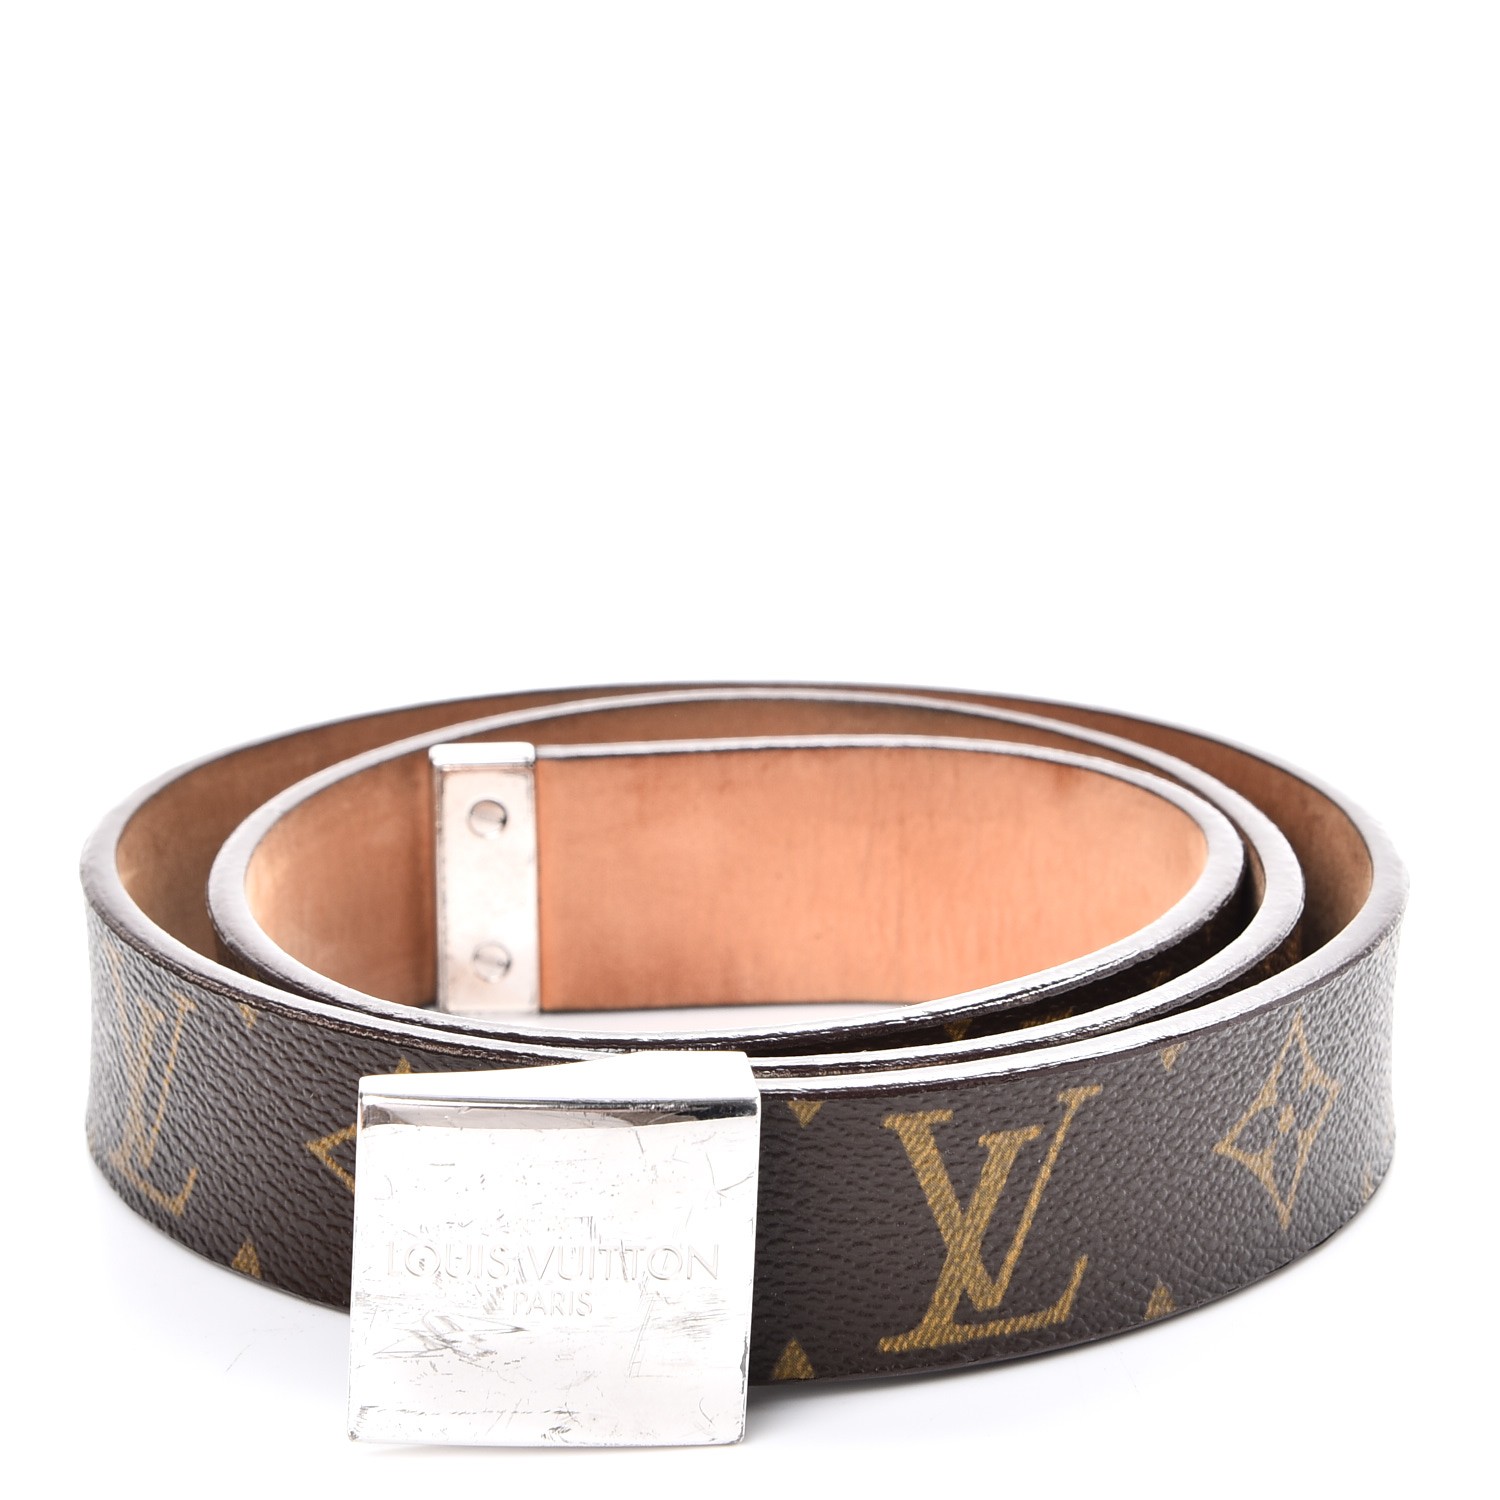 Louis Vuitton Belt With Silver Buckle